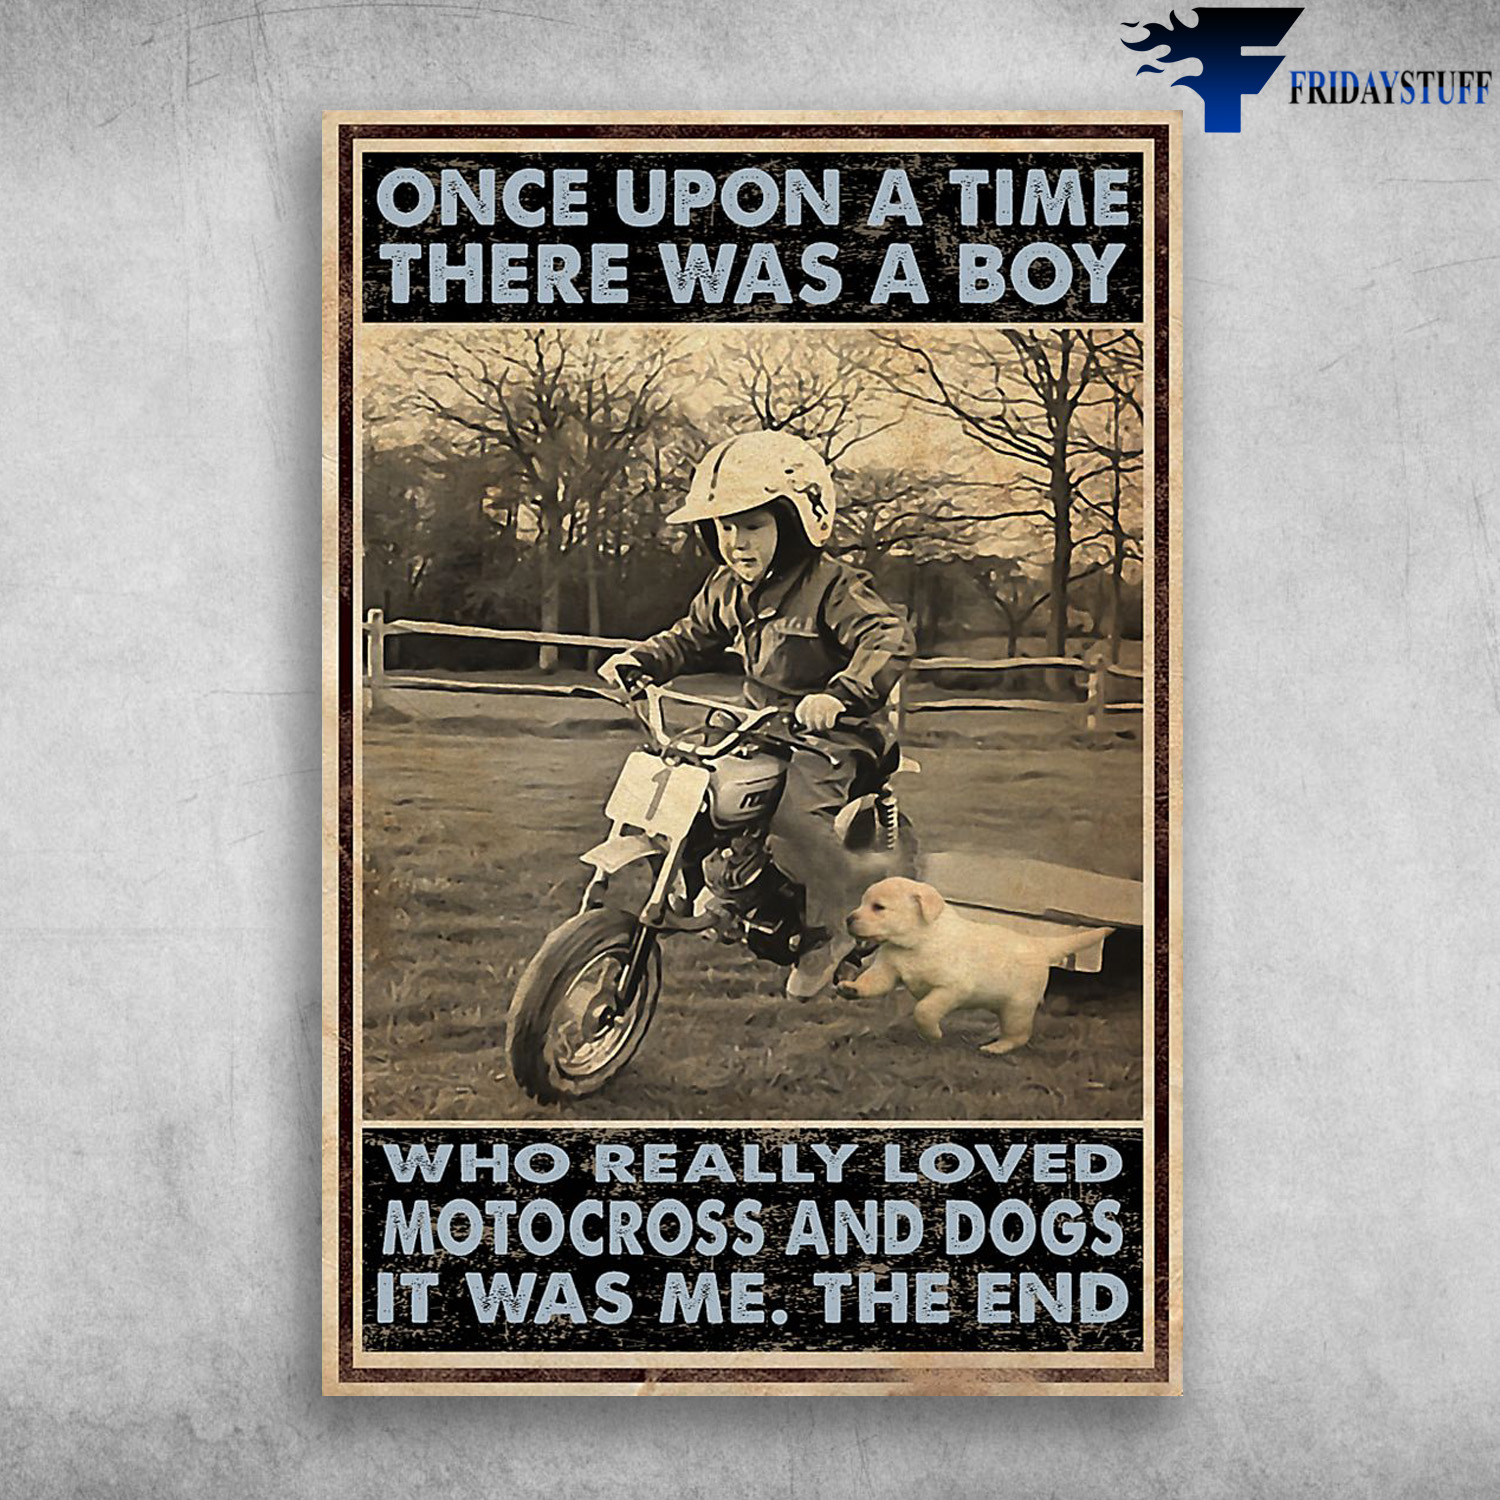 Motocross Boy With The Puppy - Once Upon A Time, There Was A Boy, Who Really Loved Motocross And Dogs It Was Me, The End